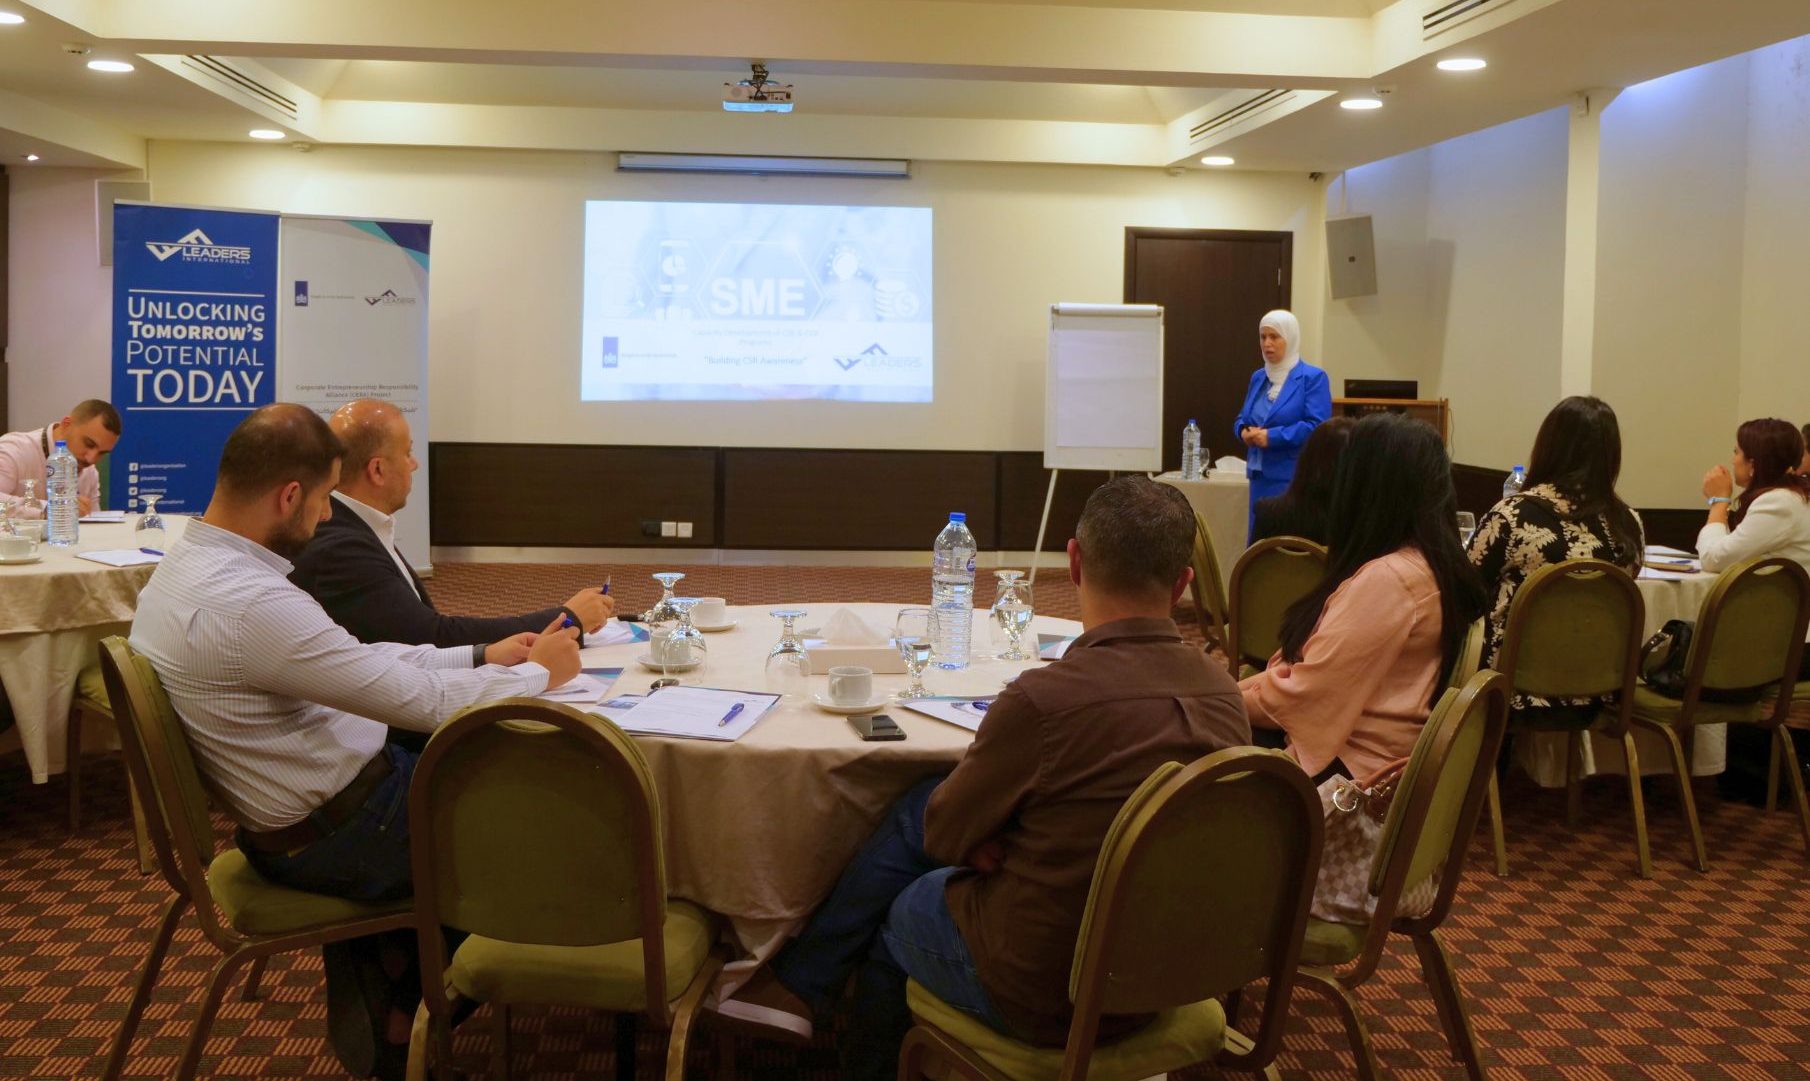 Business leaders participating in the CSR capacity-building programme organized by Leaders International in Amman.